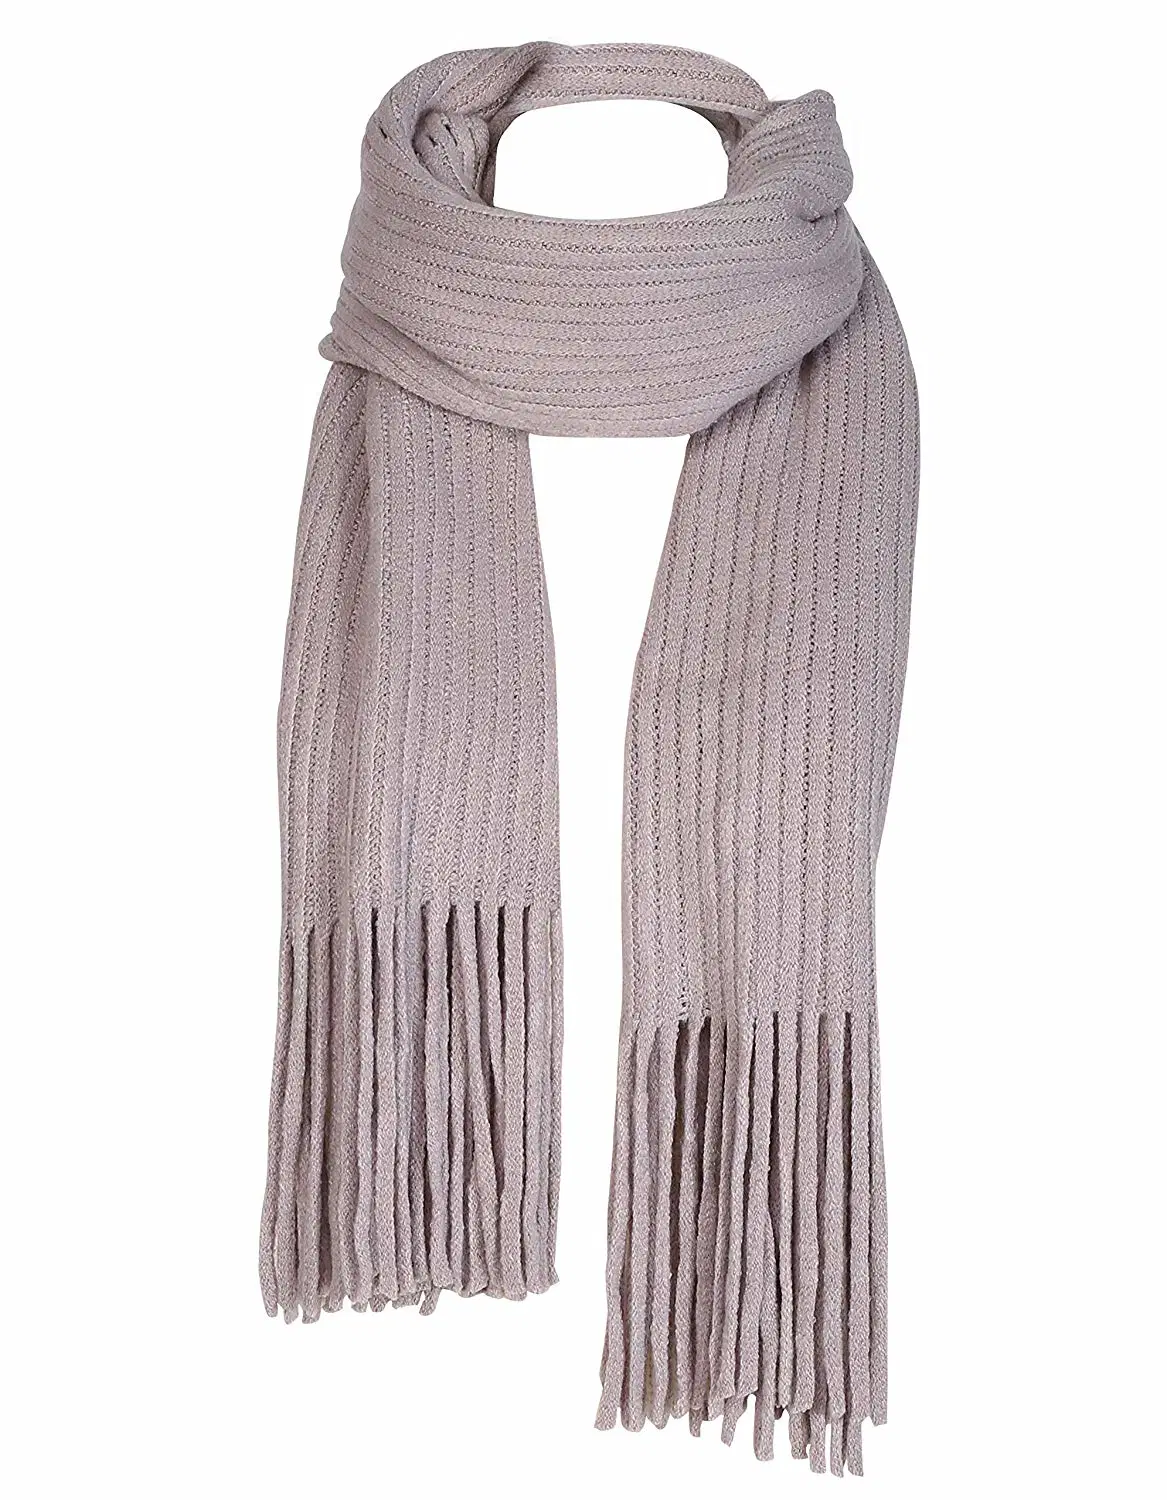 100% Acrylic Classical Winter Autumn Outdoor Protection Thick Cable Chunky Fashion Women Knit Scarf